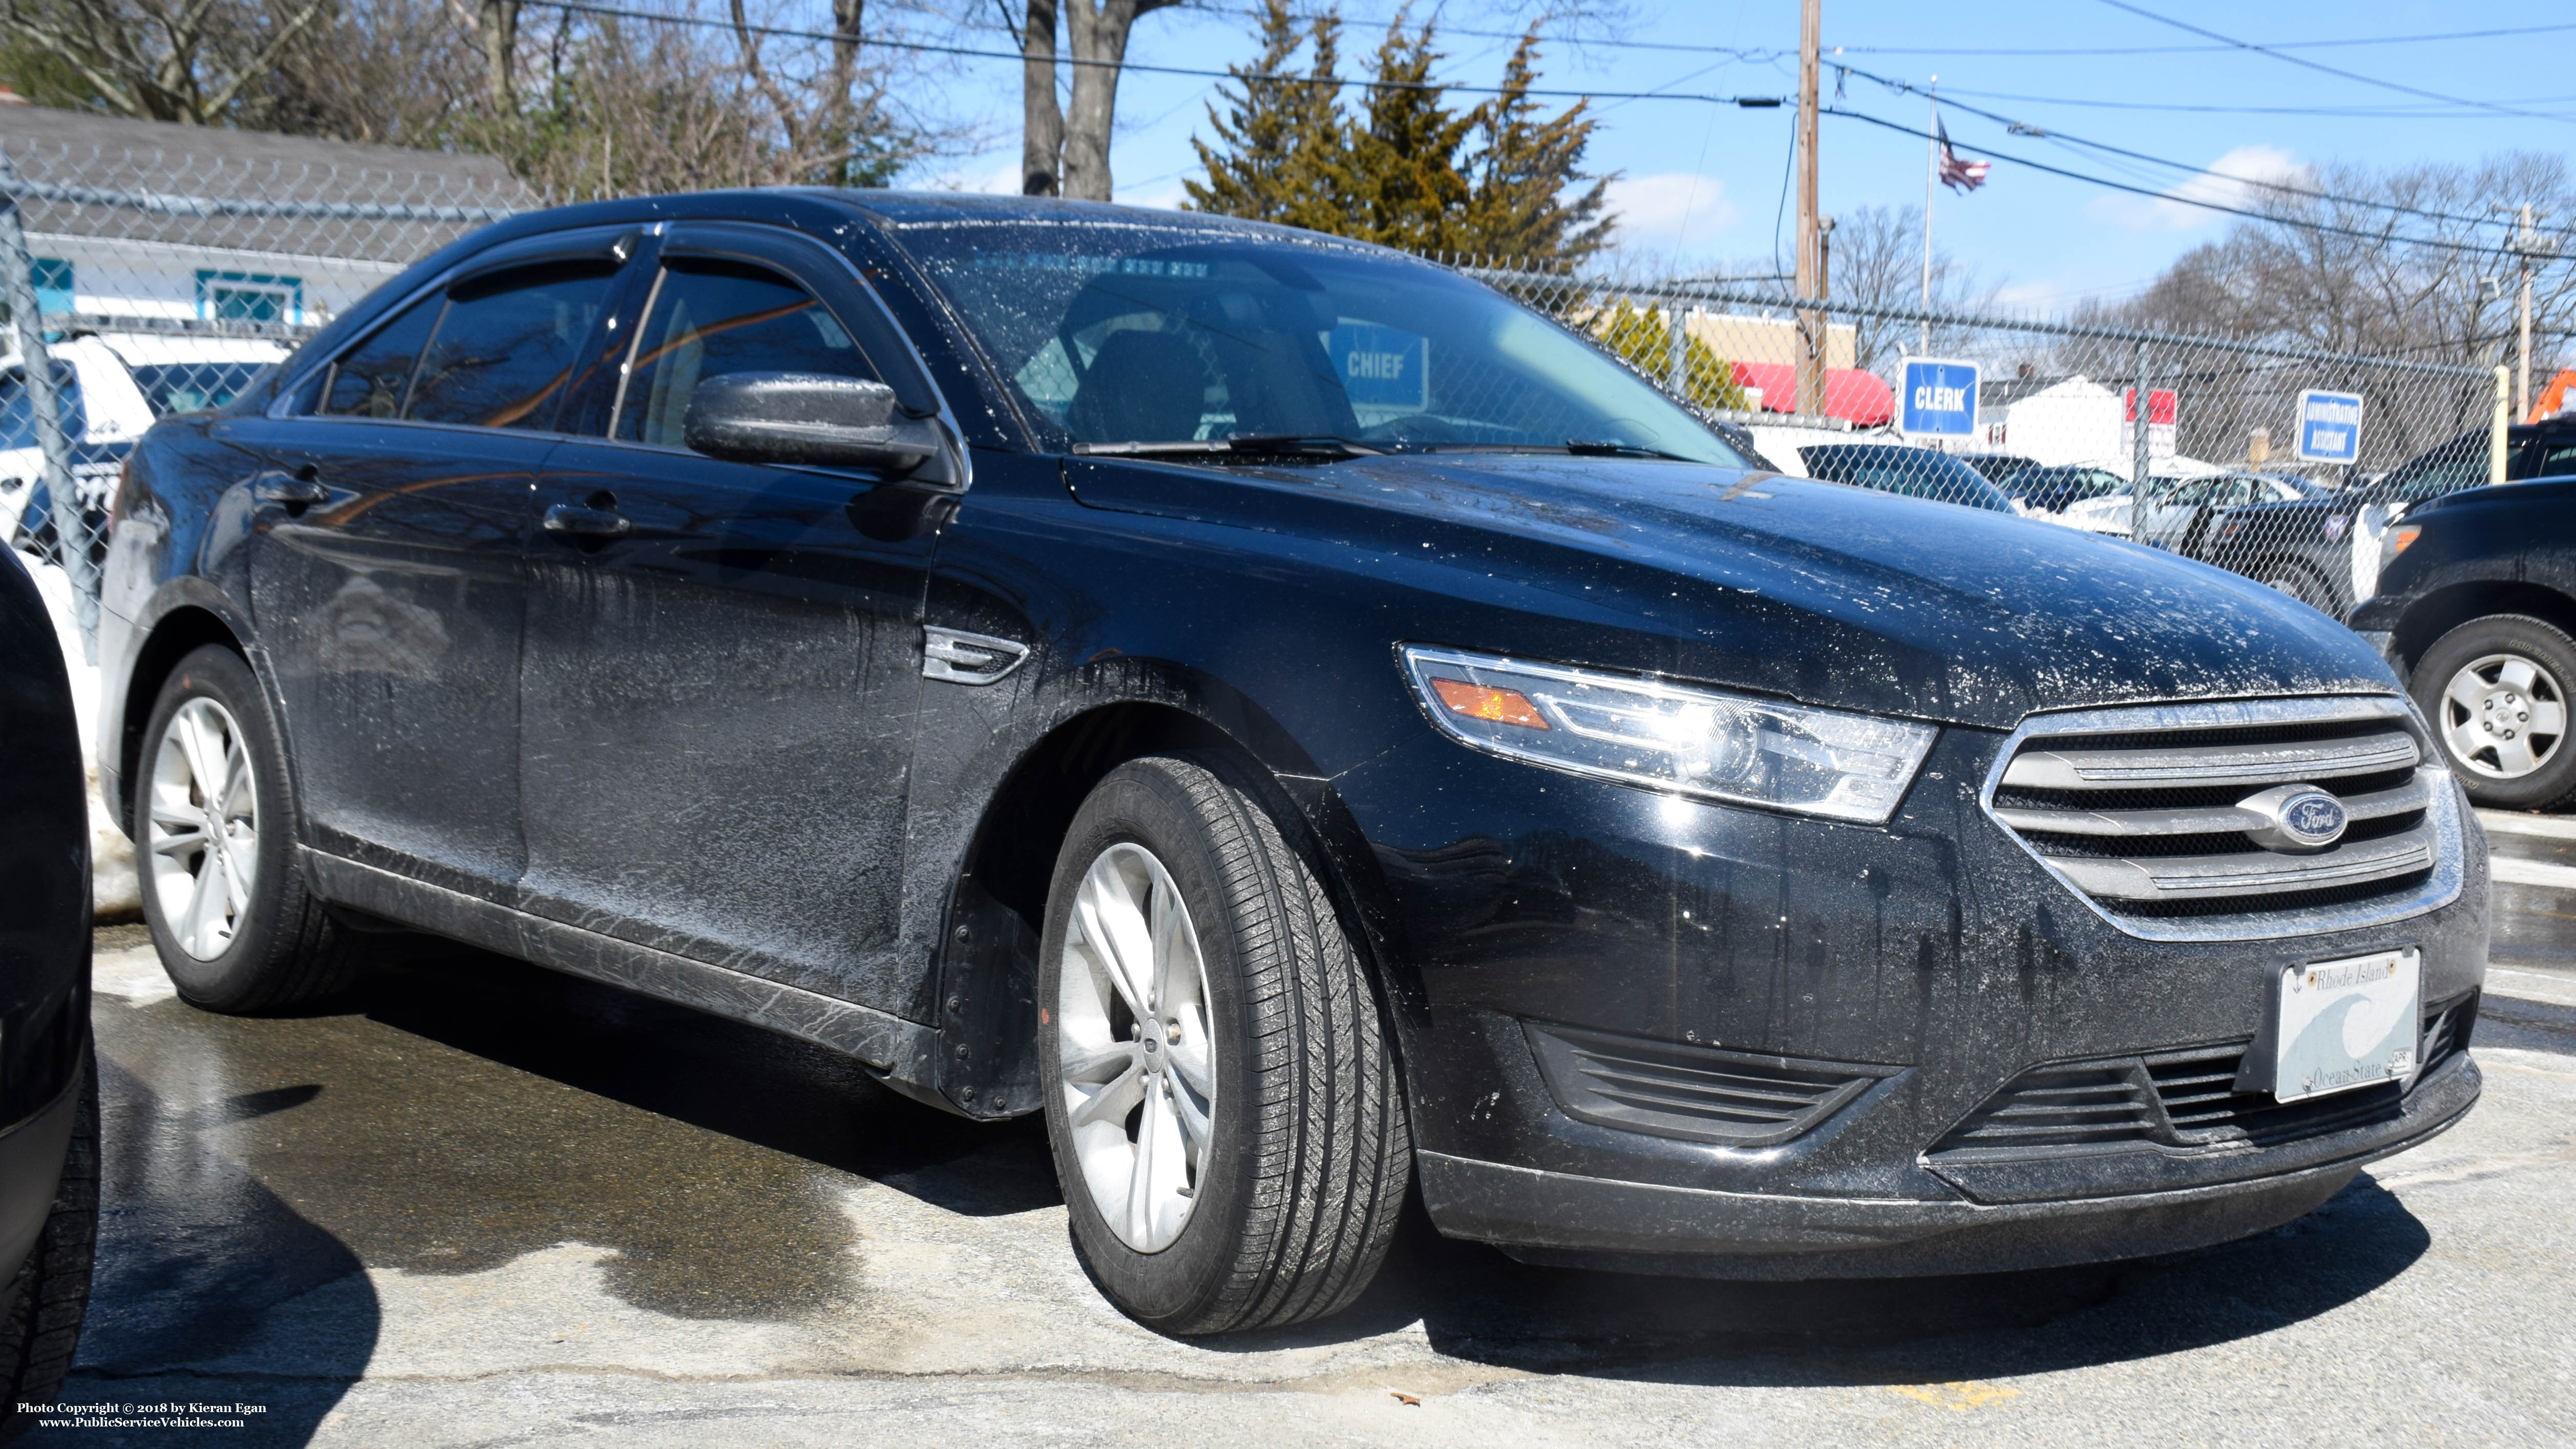 A photo  of Cumberland Police
            Unmarked Unit, a 2013-2018 Ford Taurus             taken by Kieran Egan